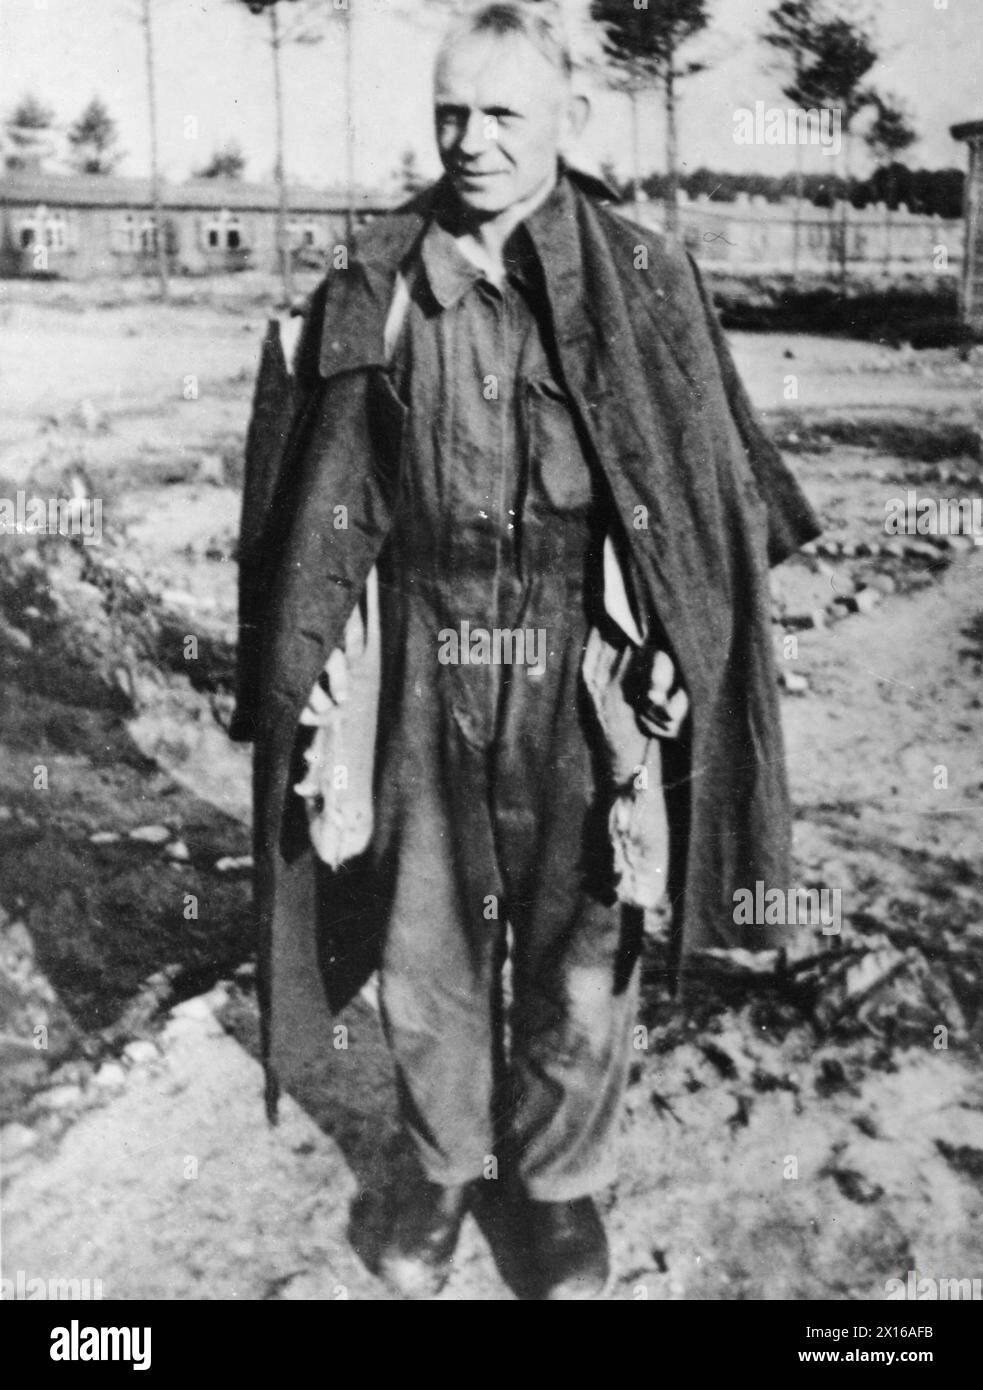 THE GREAT ESCAPE, MARCH 1944 - Sergeant-Major Hermann Glemnitz, the senior member of the German guard of the Stalag Luft III in Sagan, demonstrates the 'penguins' trouser legs for dispersing sand. The bags should be hanging inside the trouser legs, but he is wearing his 'ferret' overalls.Photograph probably taken just after Glemnitz had stumbled across the 'Tom' escape tunnel at Stalag Luft III, Sagan, September 1943 German Air Force, Glemnitz, Hermann Stock Photo